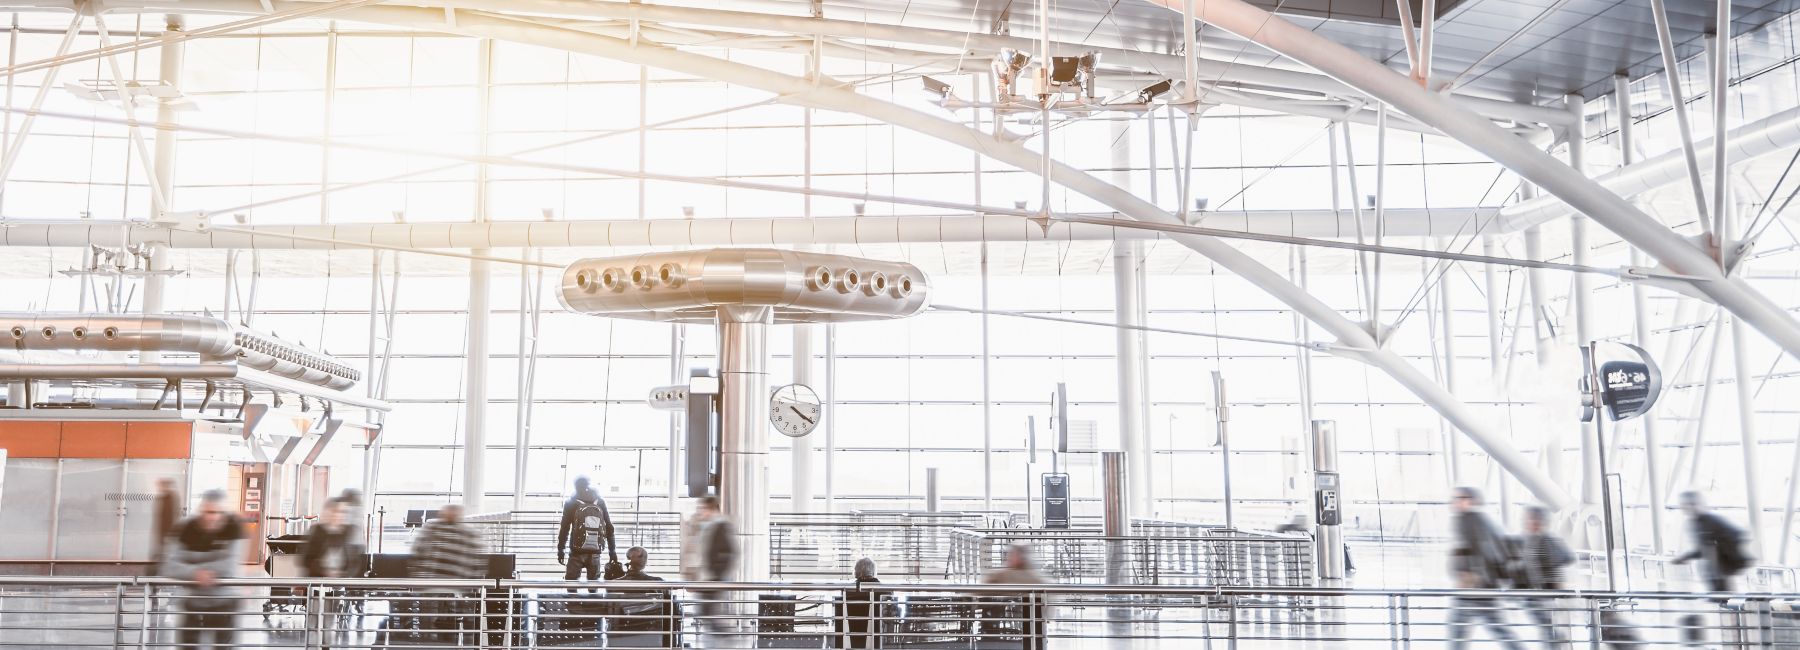 Blog about building the airports of the future using digital twin technology